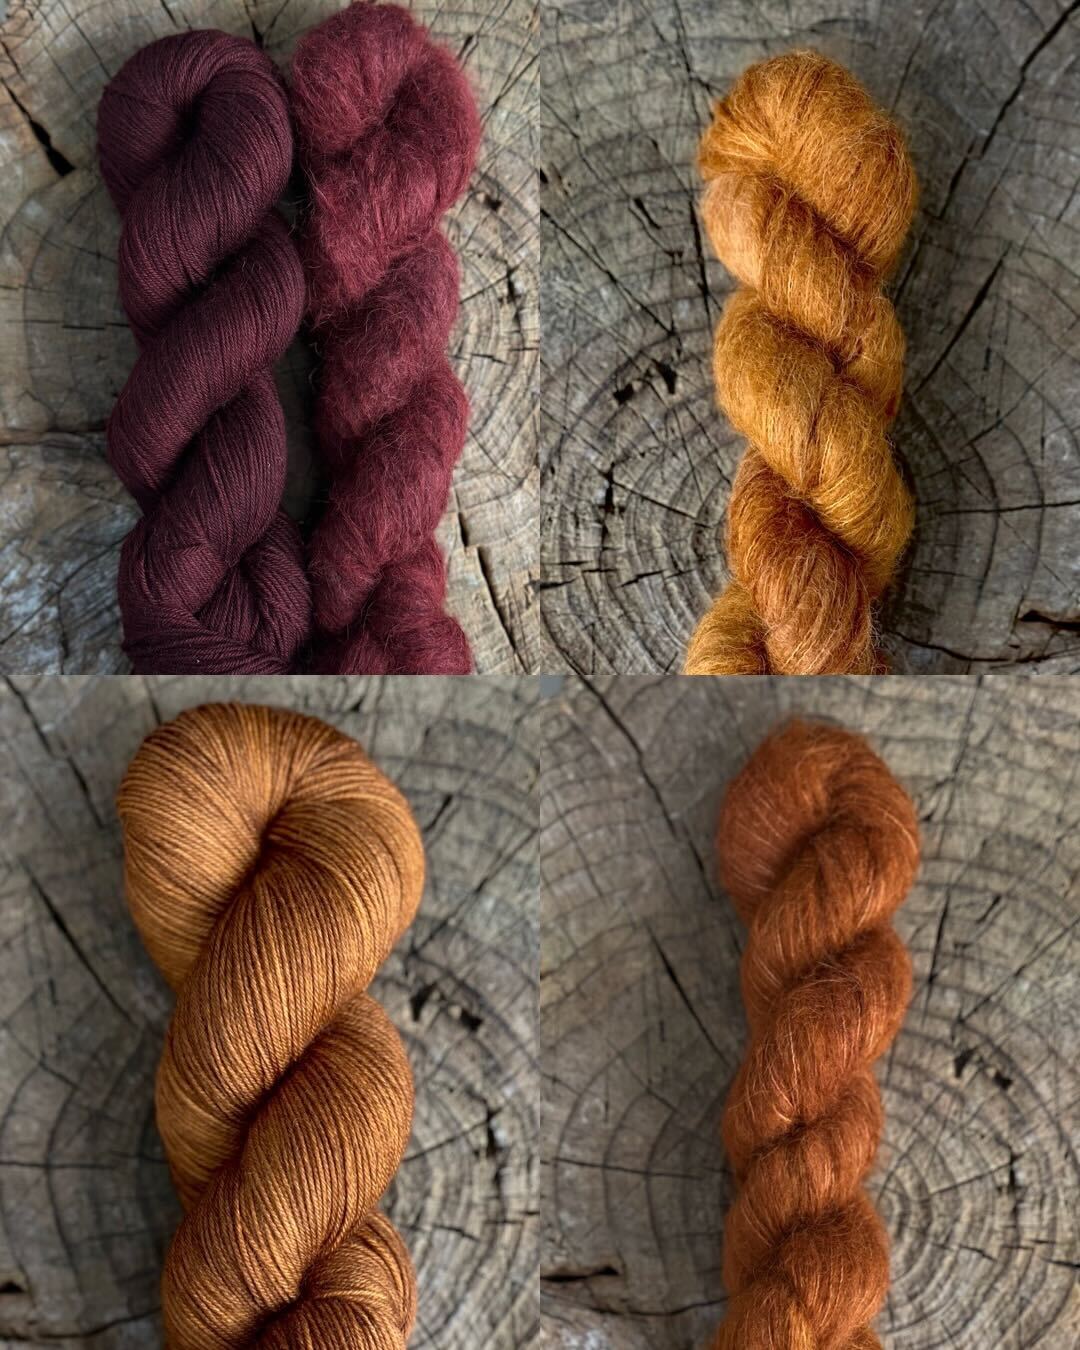 New Colors For Fall!